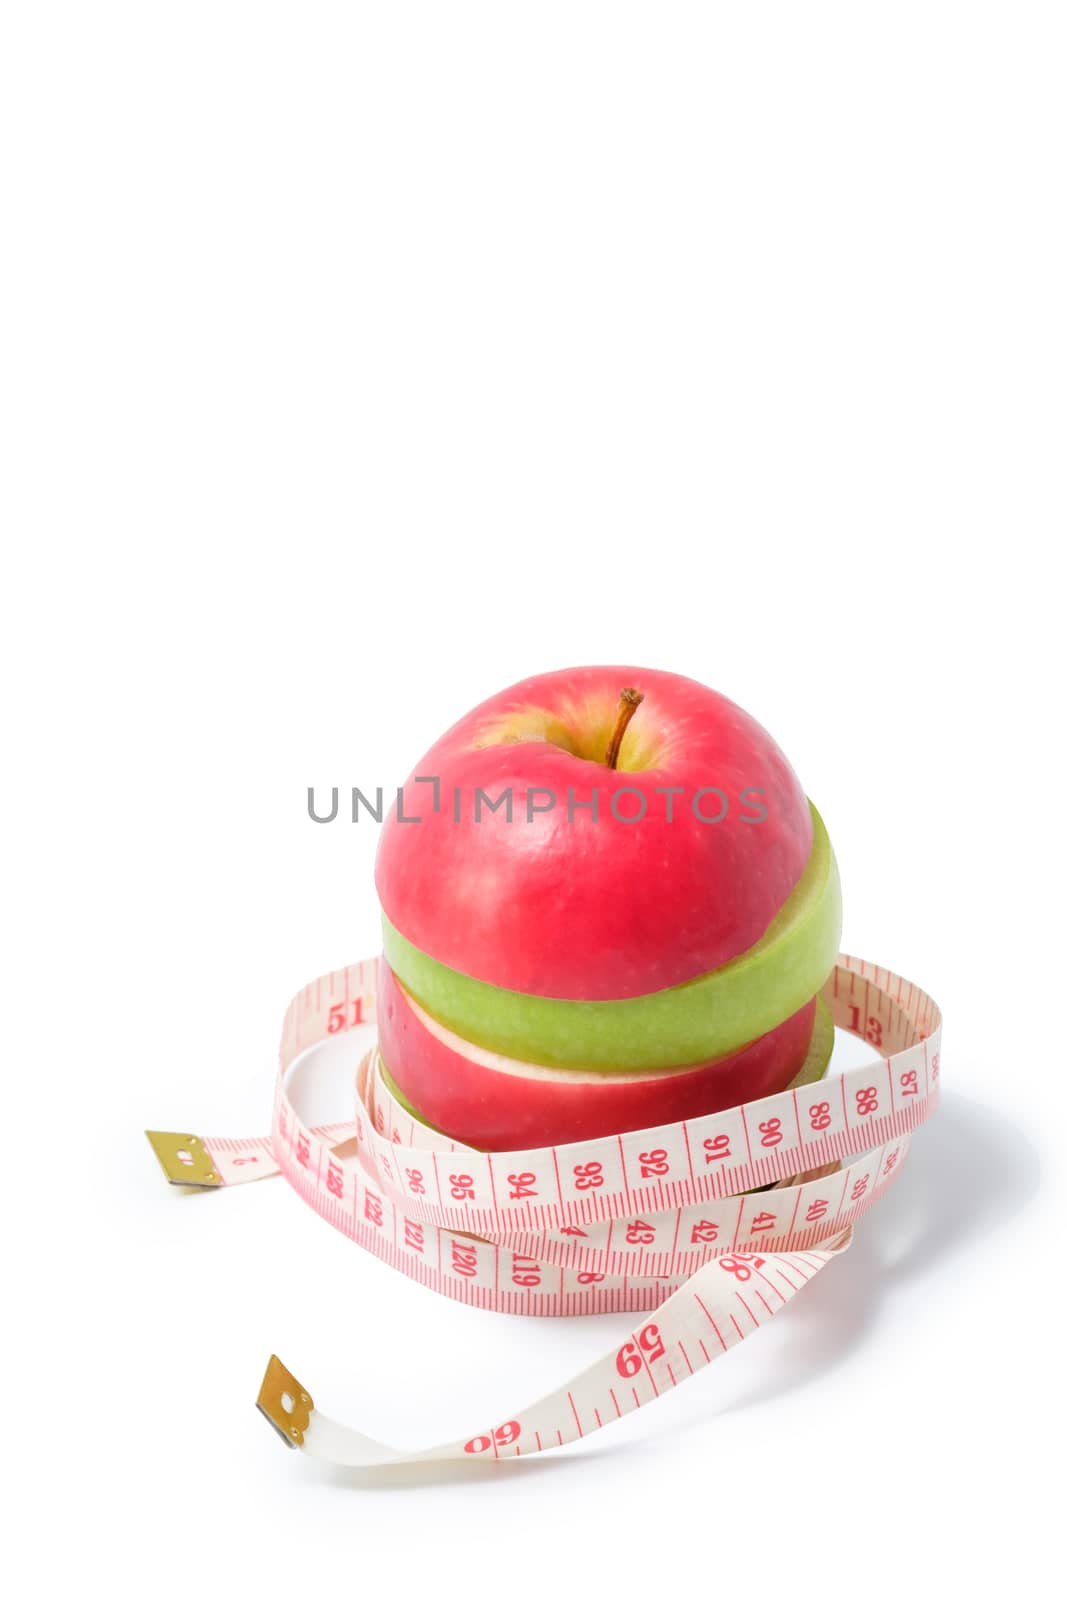 slice red and green apples with waist measure on white background.space for adding your text.

